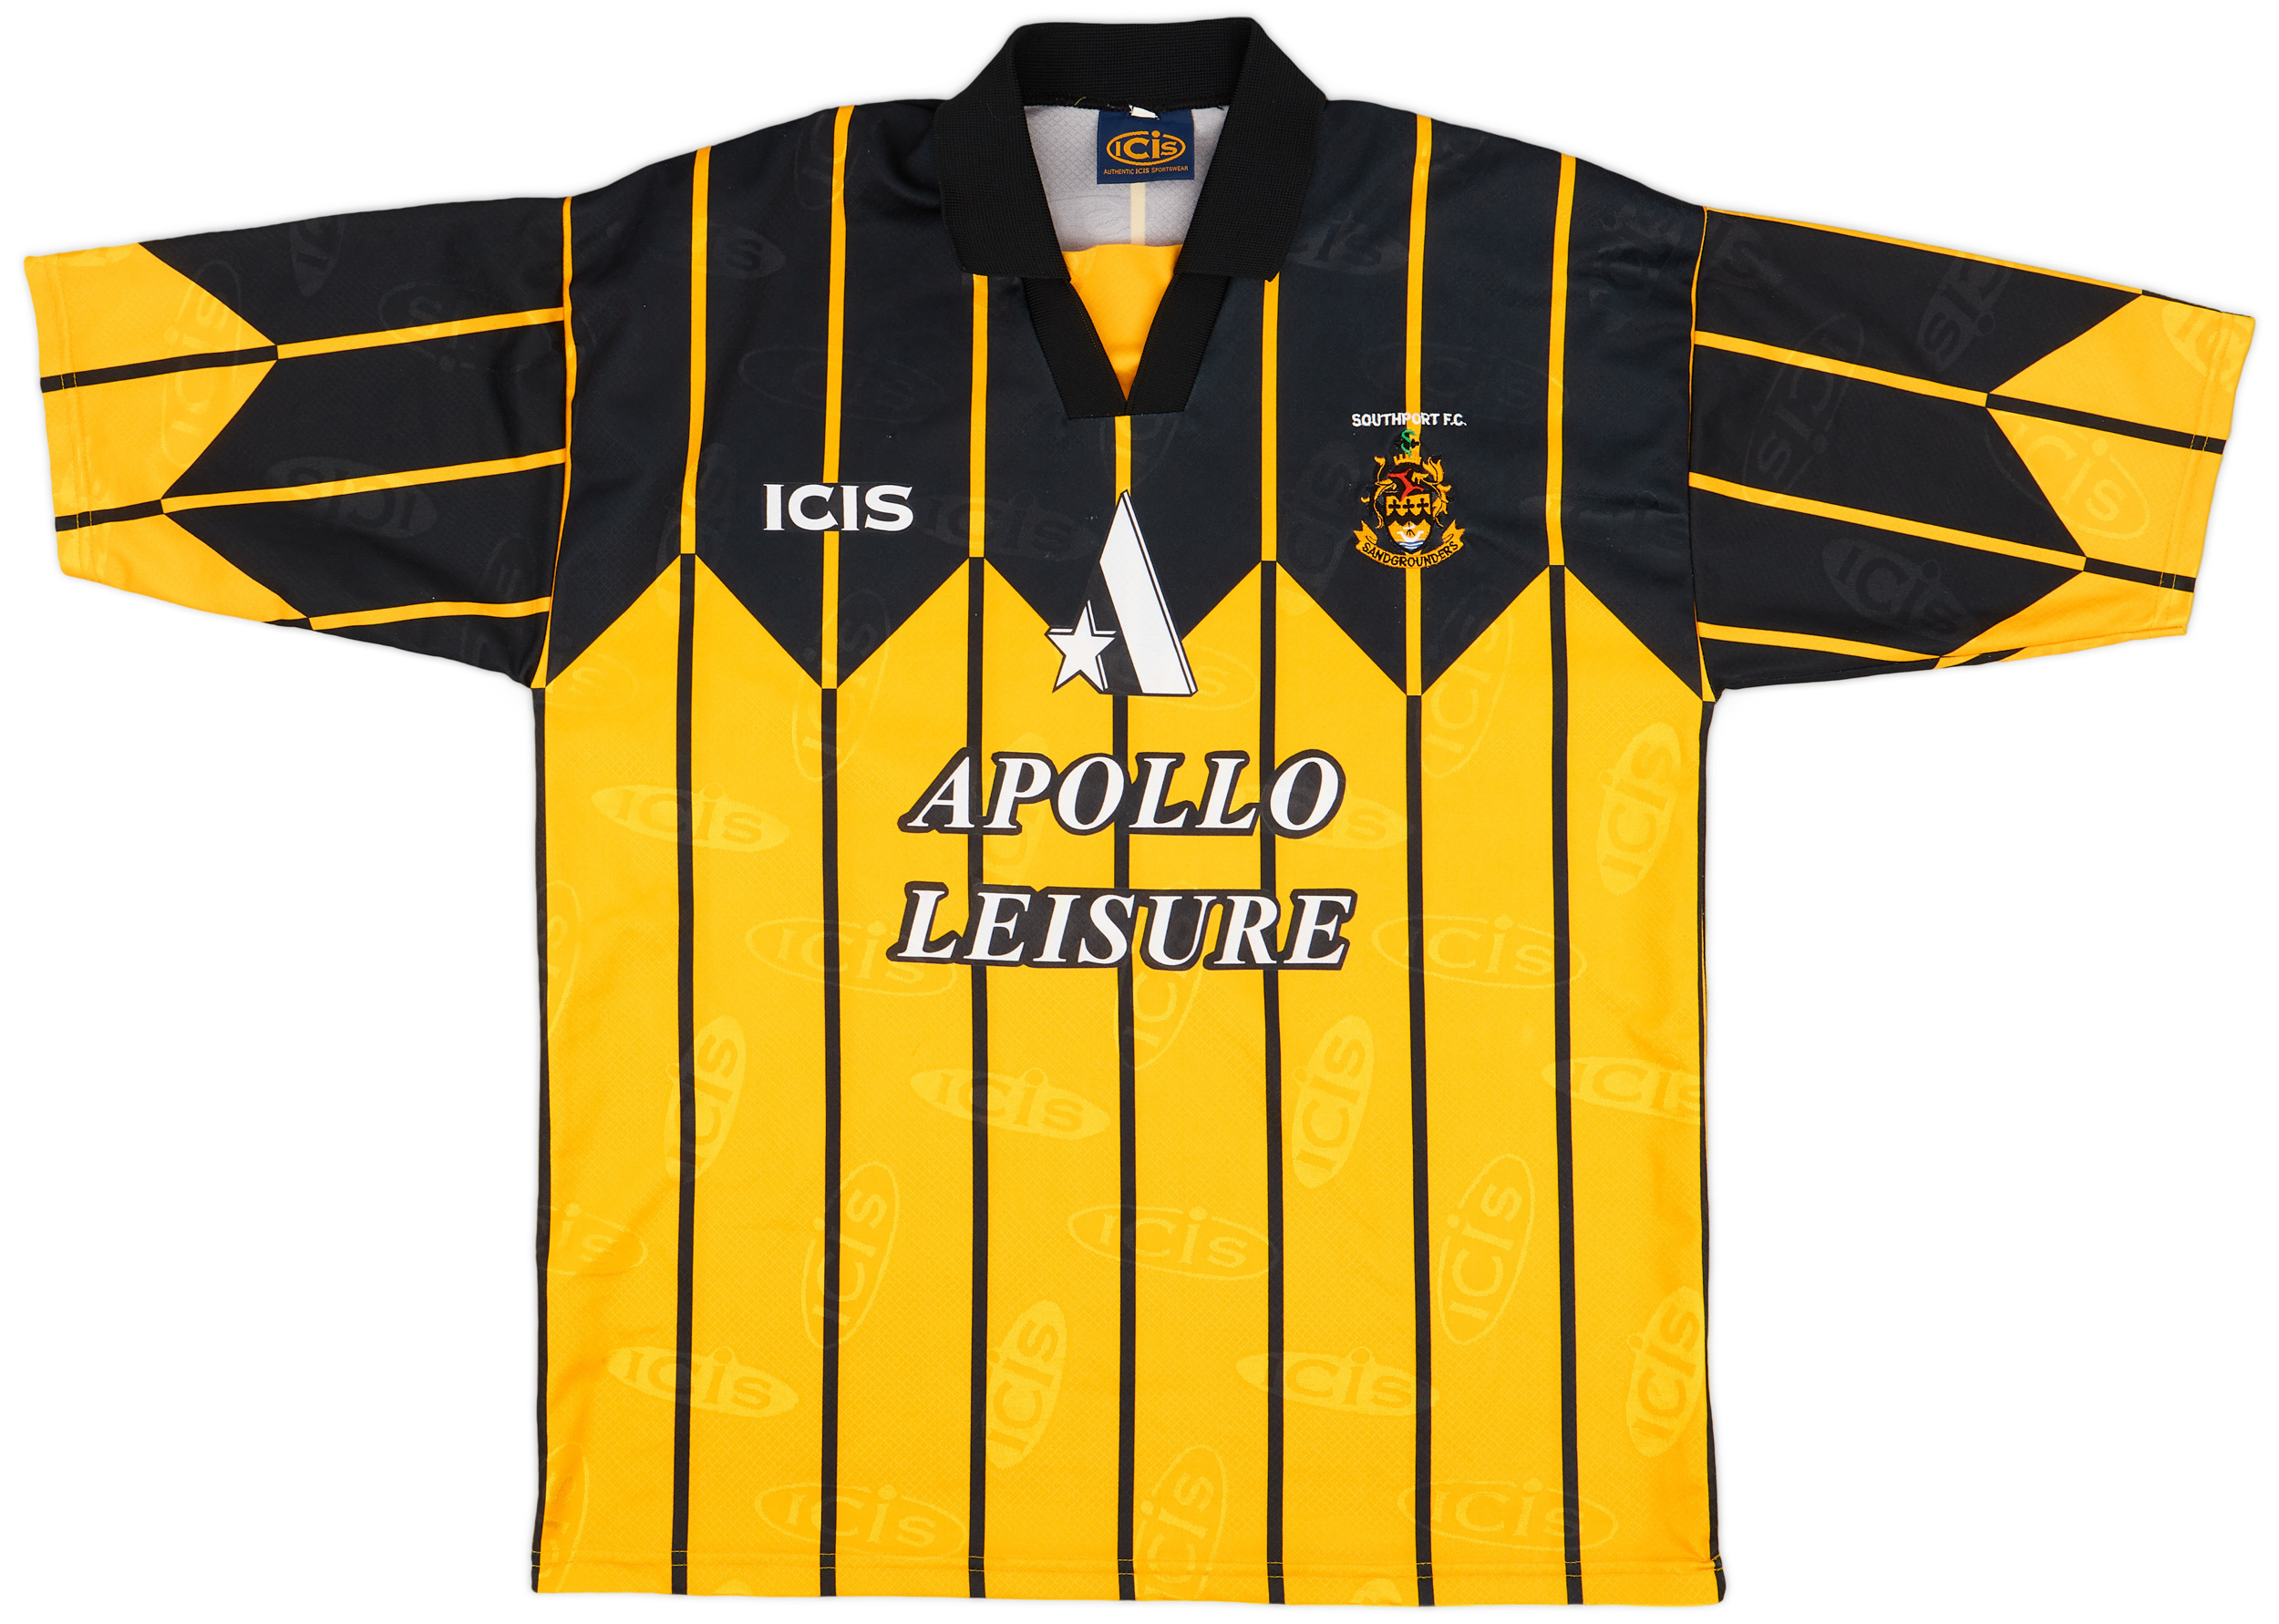 1999-01 Southport Home Shirt - 9/10 - ()